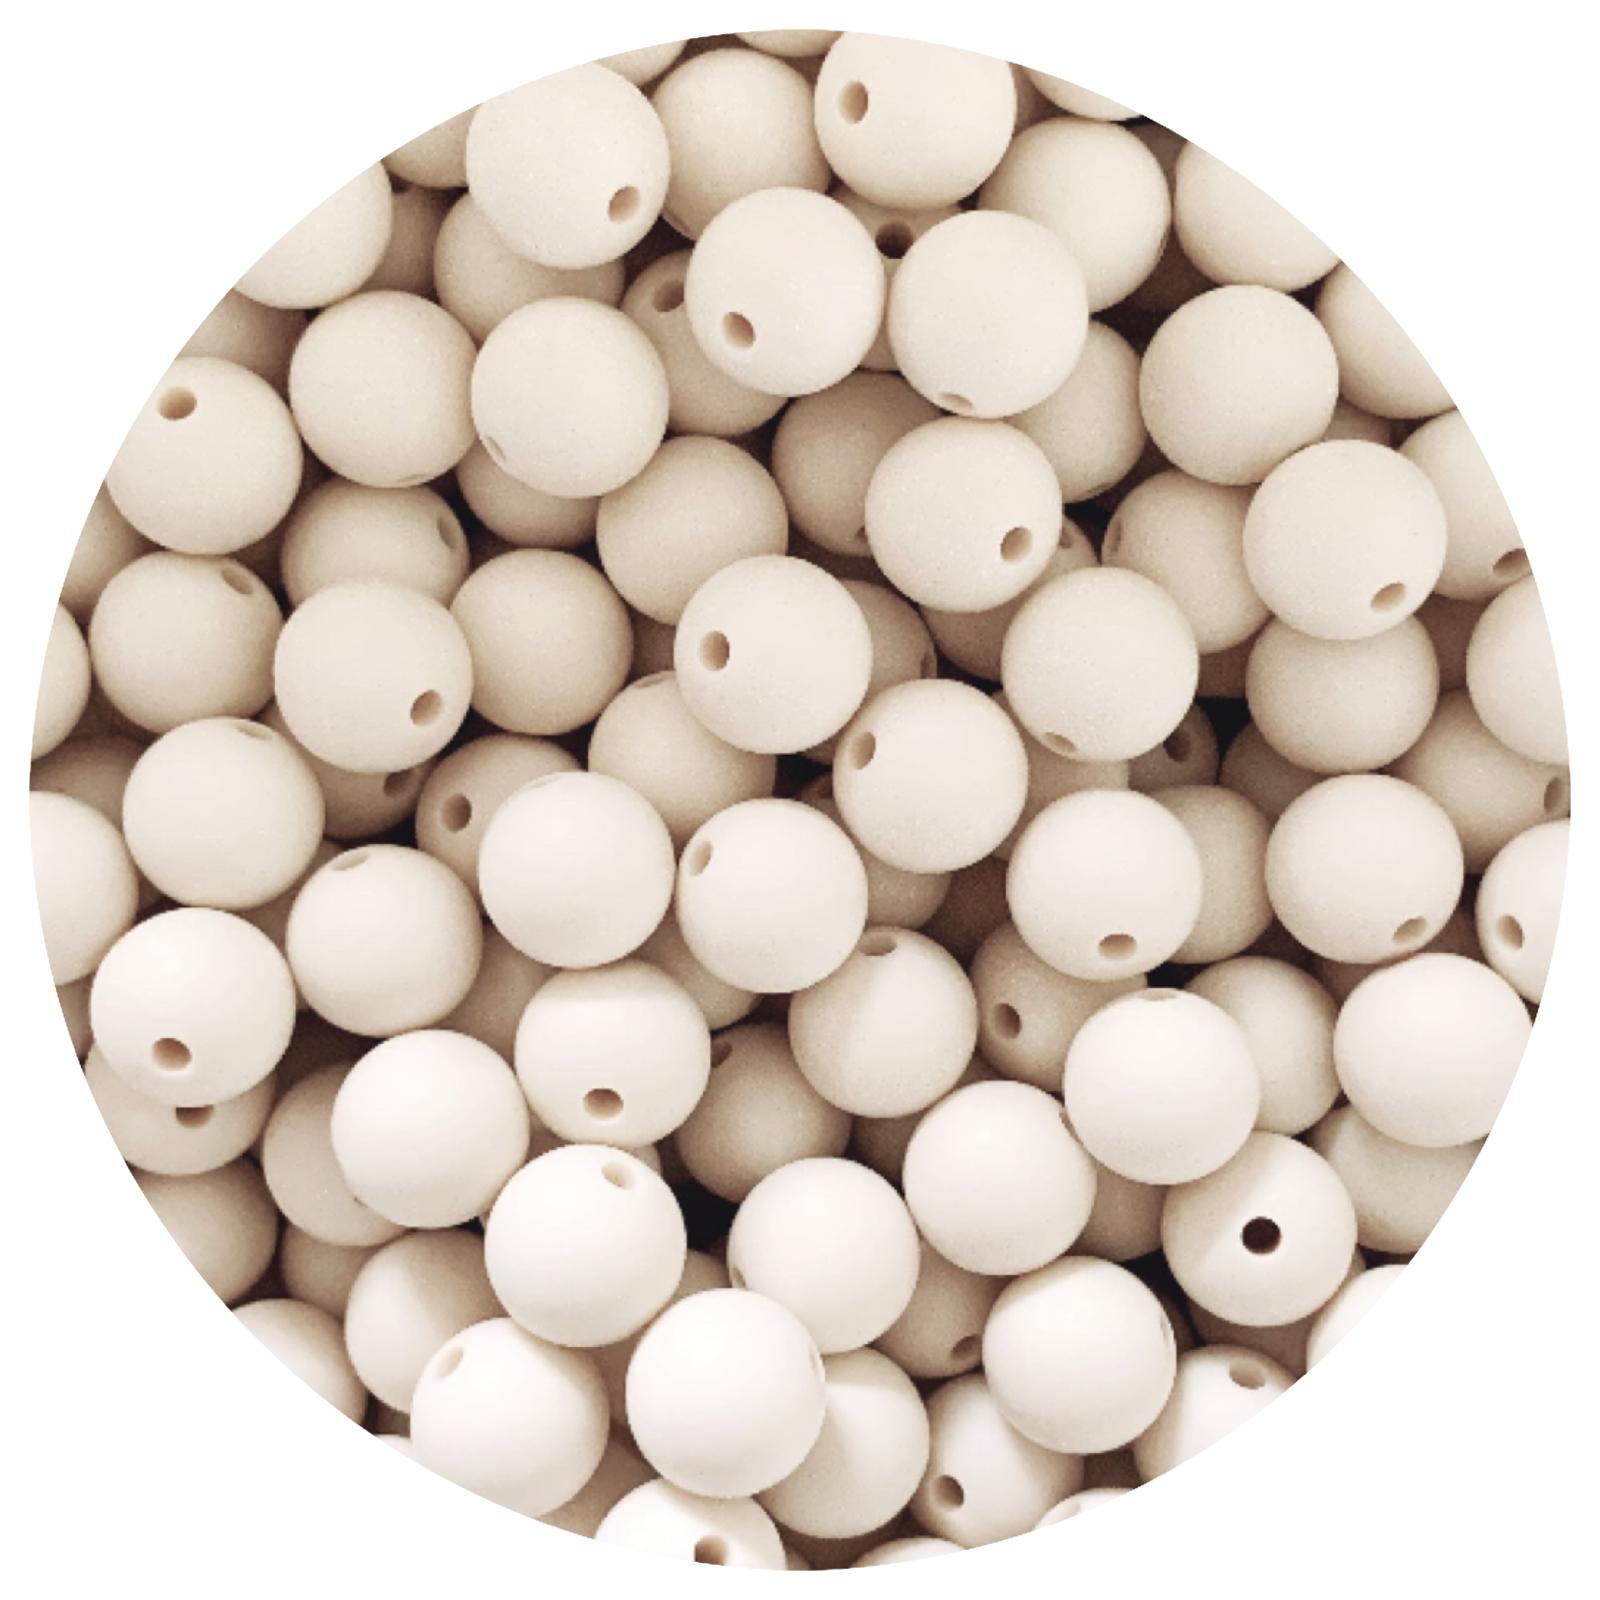 Linen - 12mm Round Silicone Beads - 10 beads